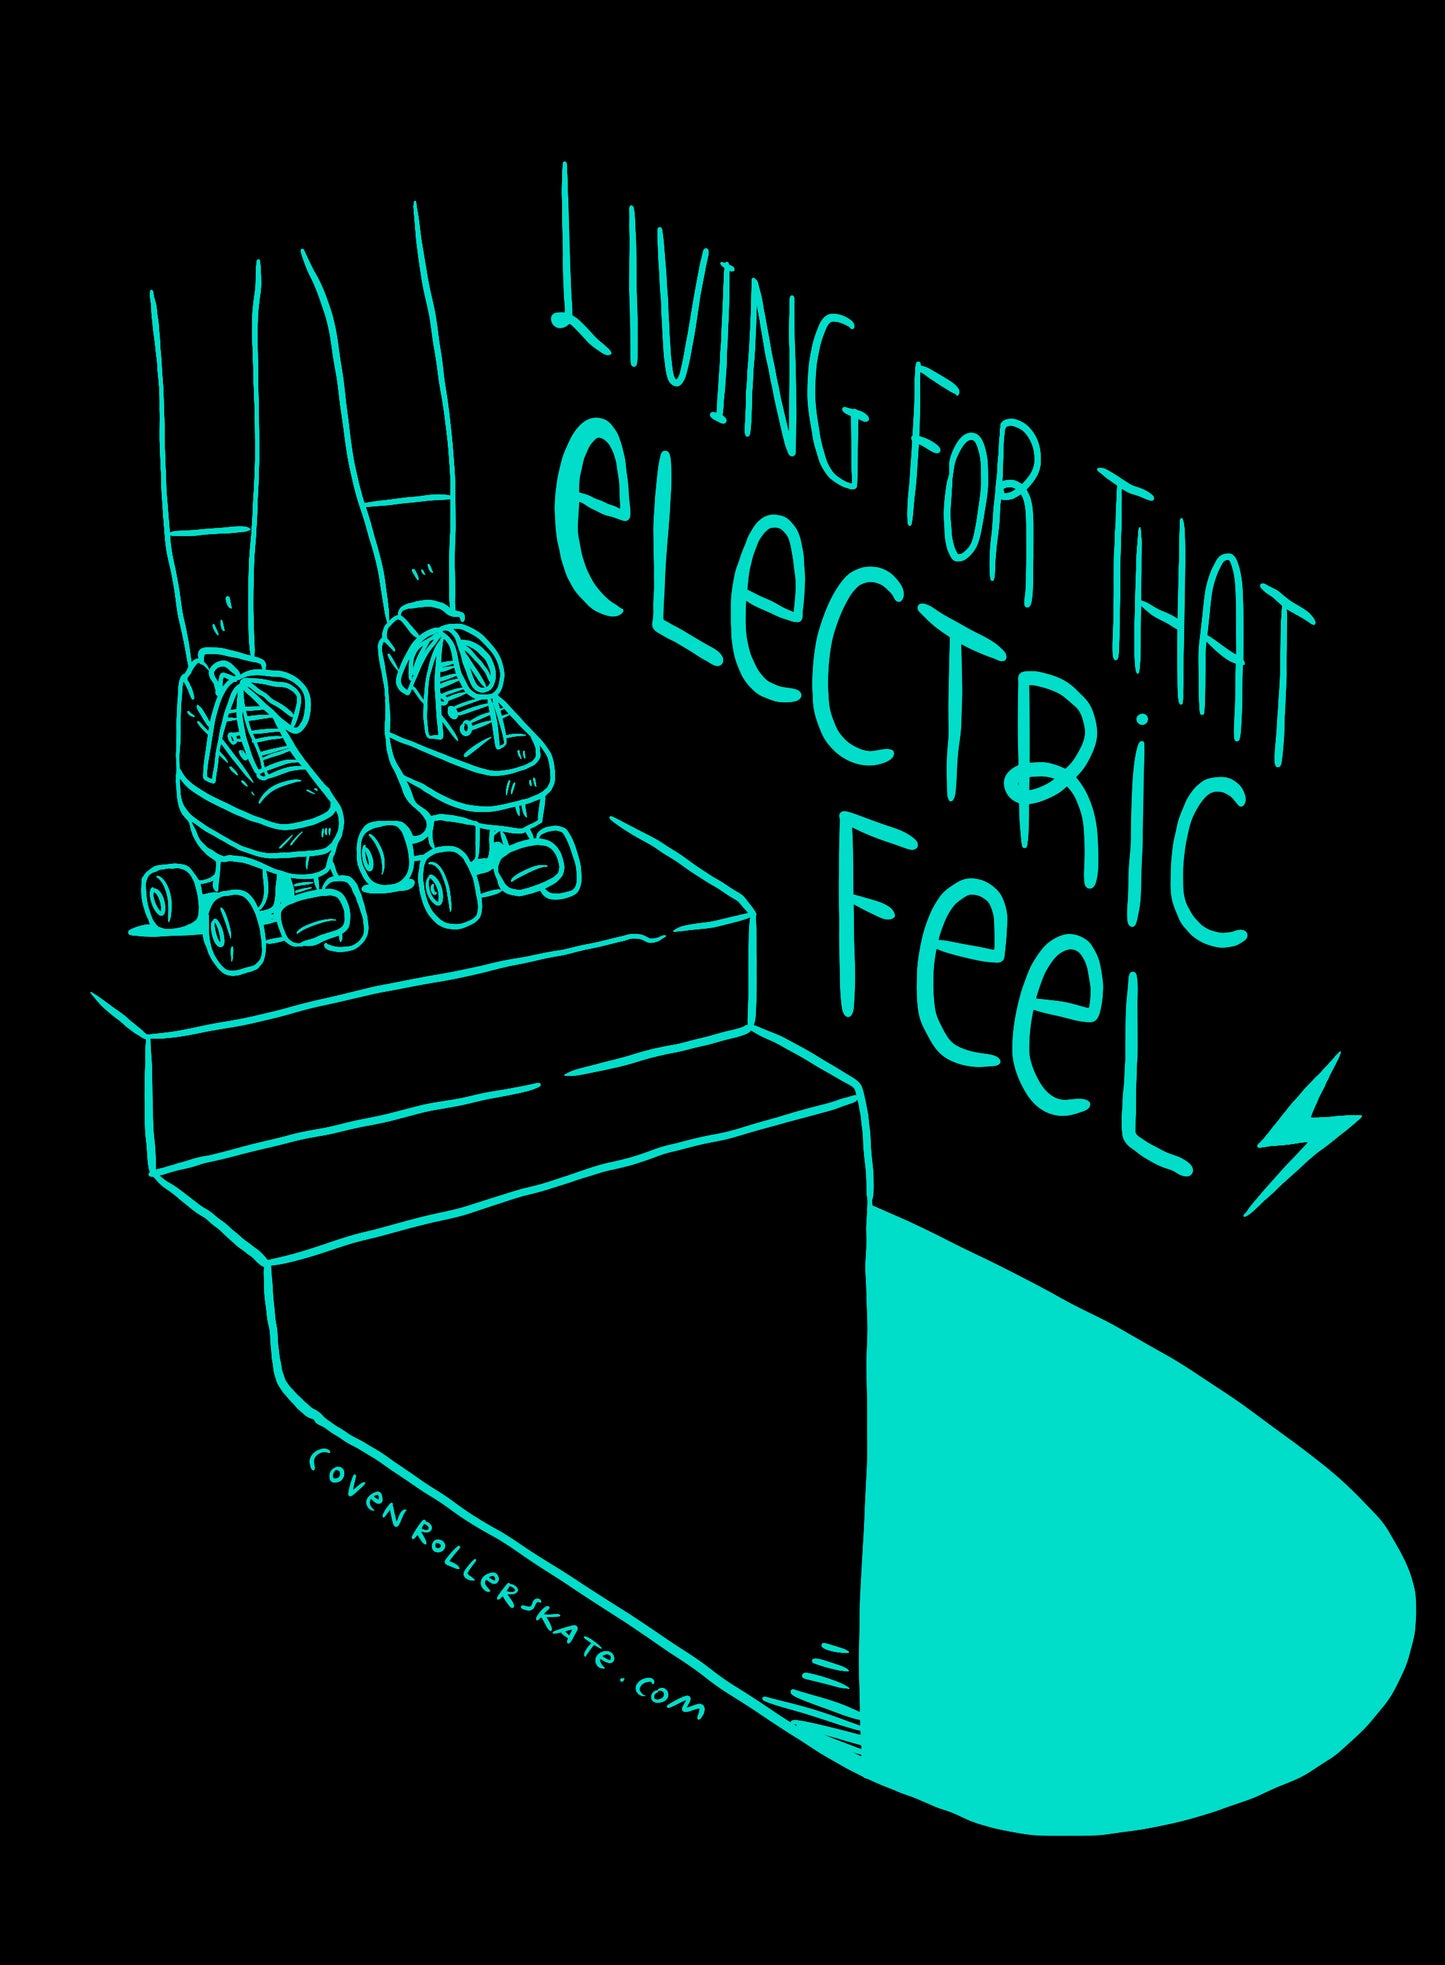 T-shirt Electric Feel by Coven rollerskate